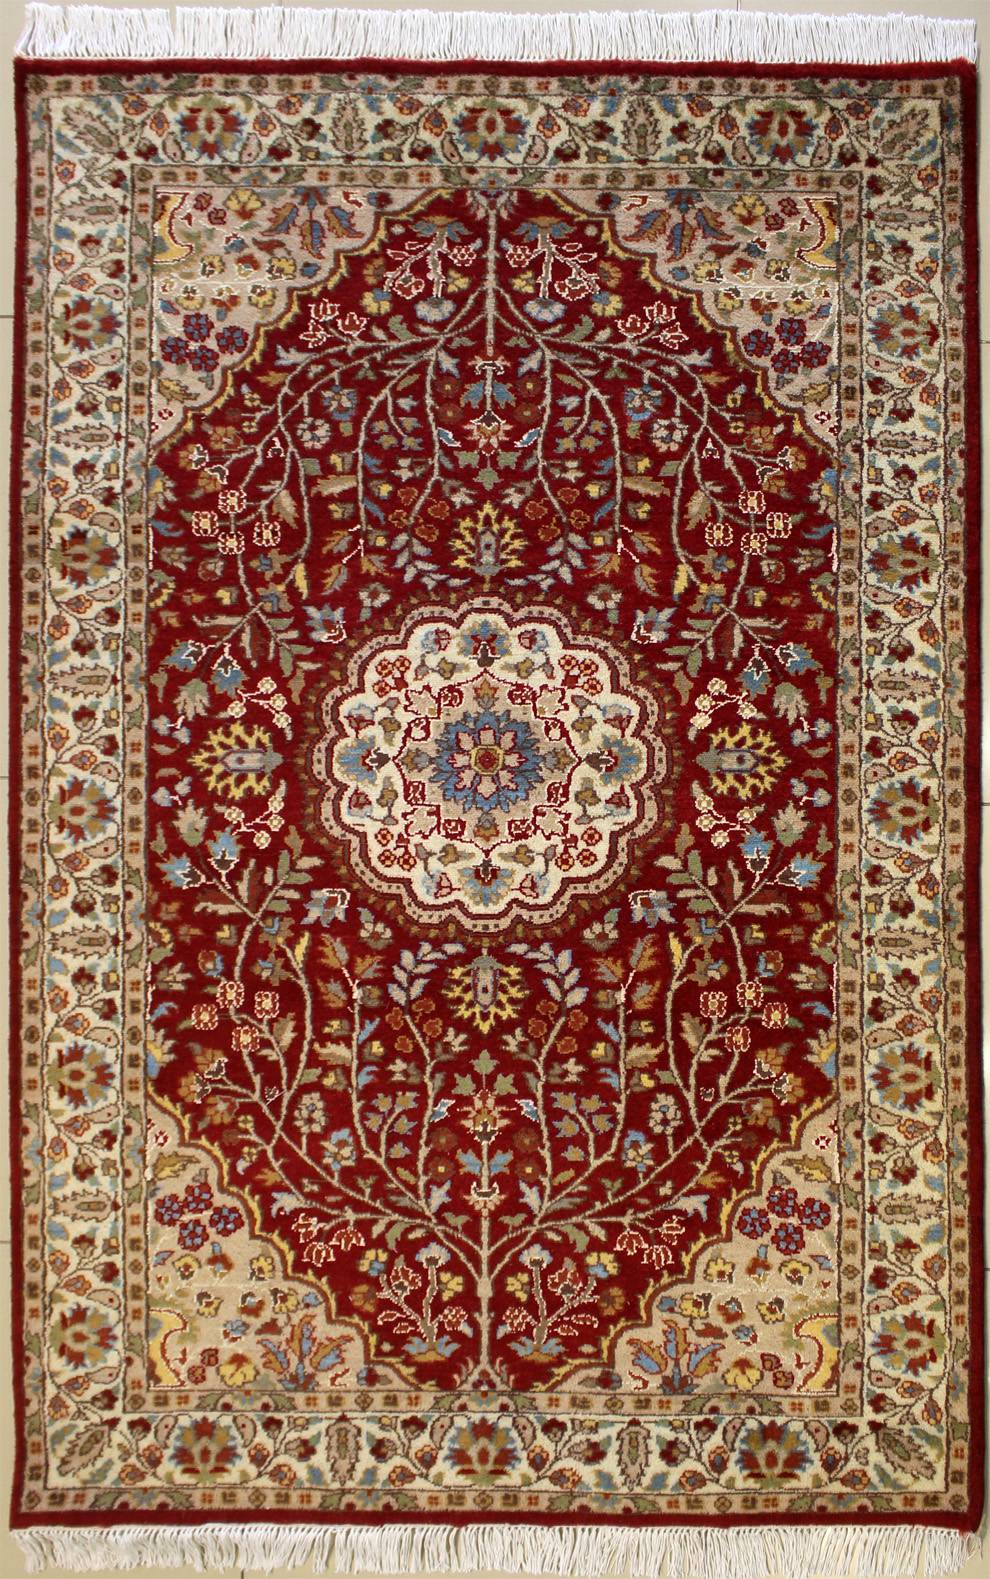 4x6 Rectangular Double Knot Rug RugsTC 4'0 x 6'1 Pak Persian Area Rug with Silk & Wool Pile Floral Design 100% Original Hand-Knotted in Greenish Blue,Reddish Brown 